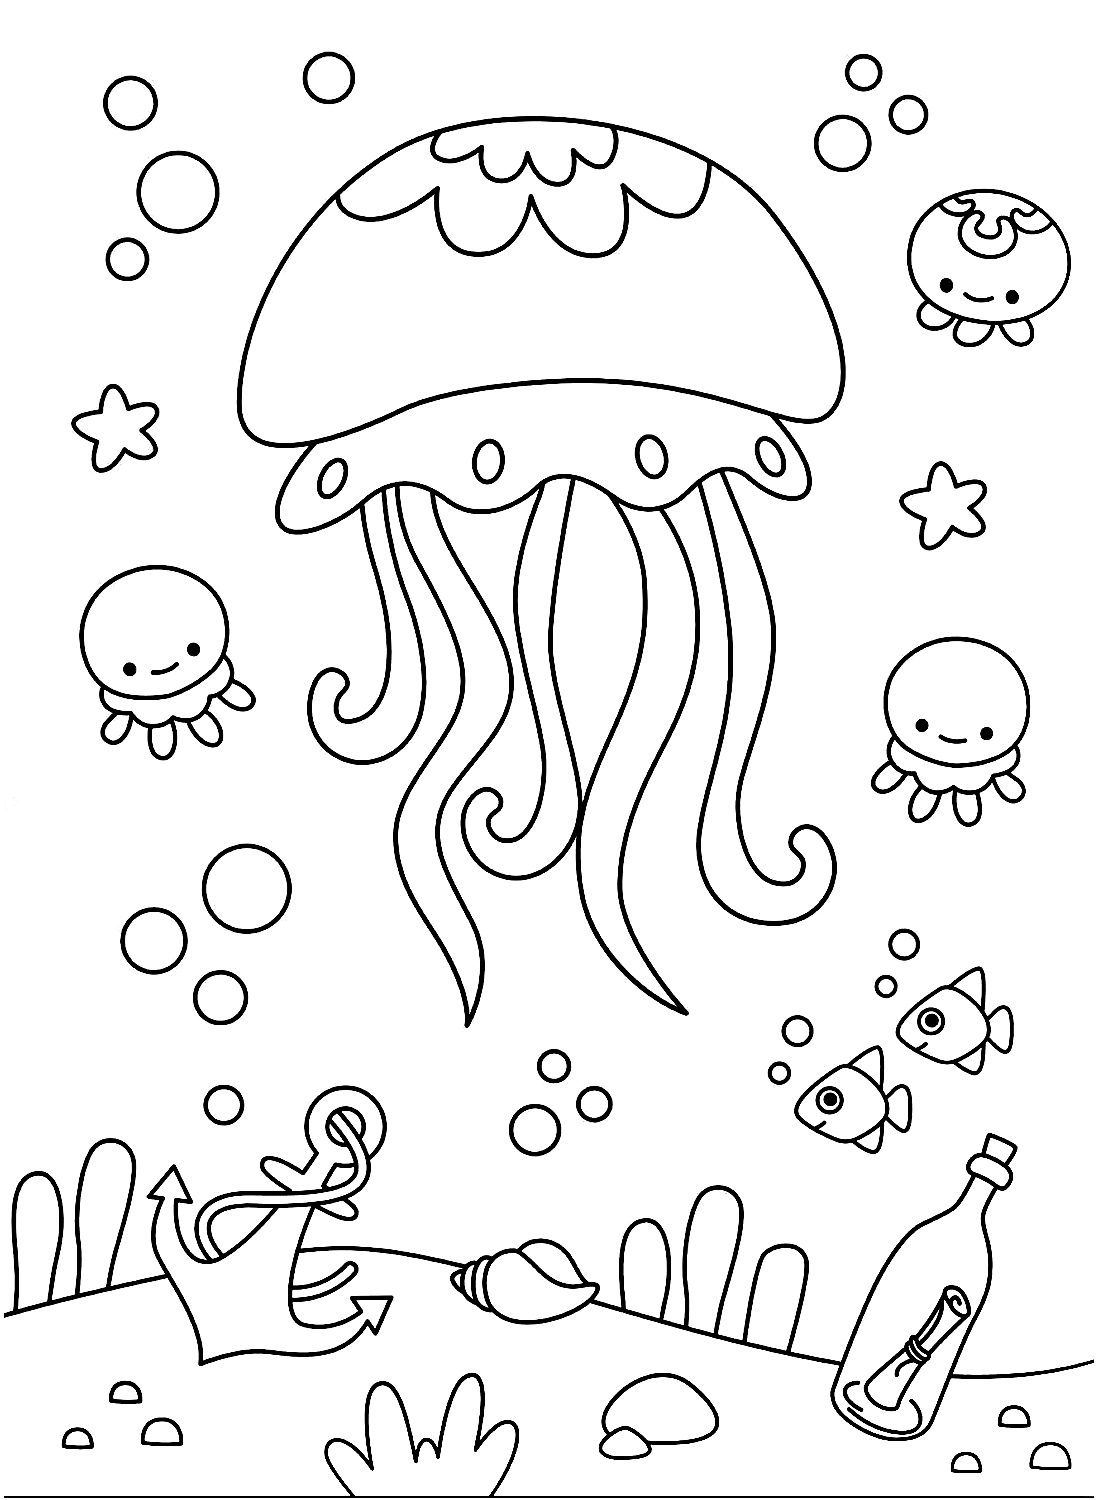 The Jellyfish Coloring Page